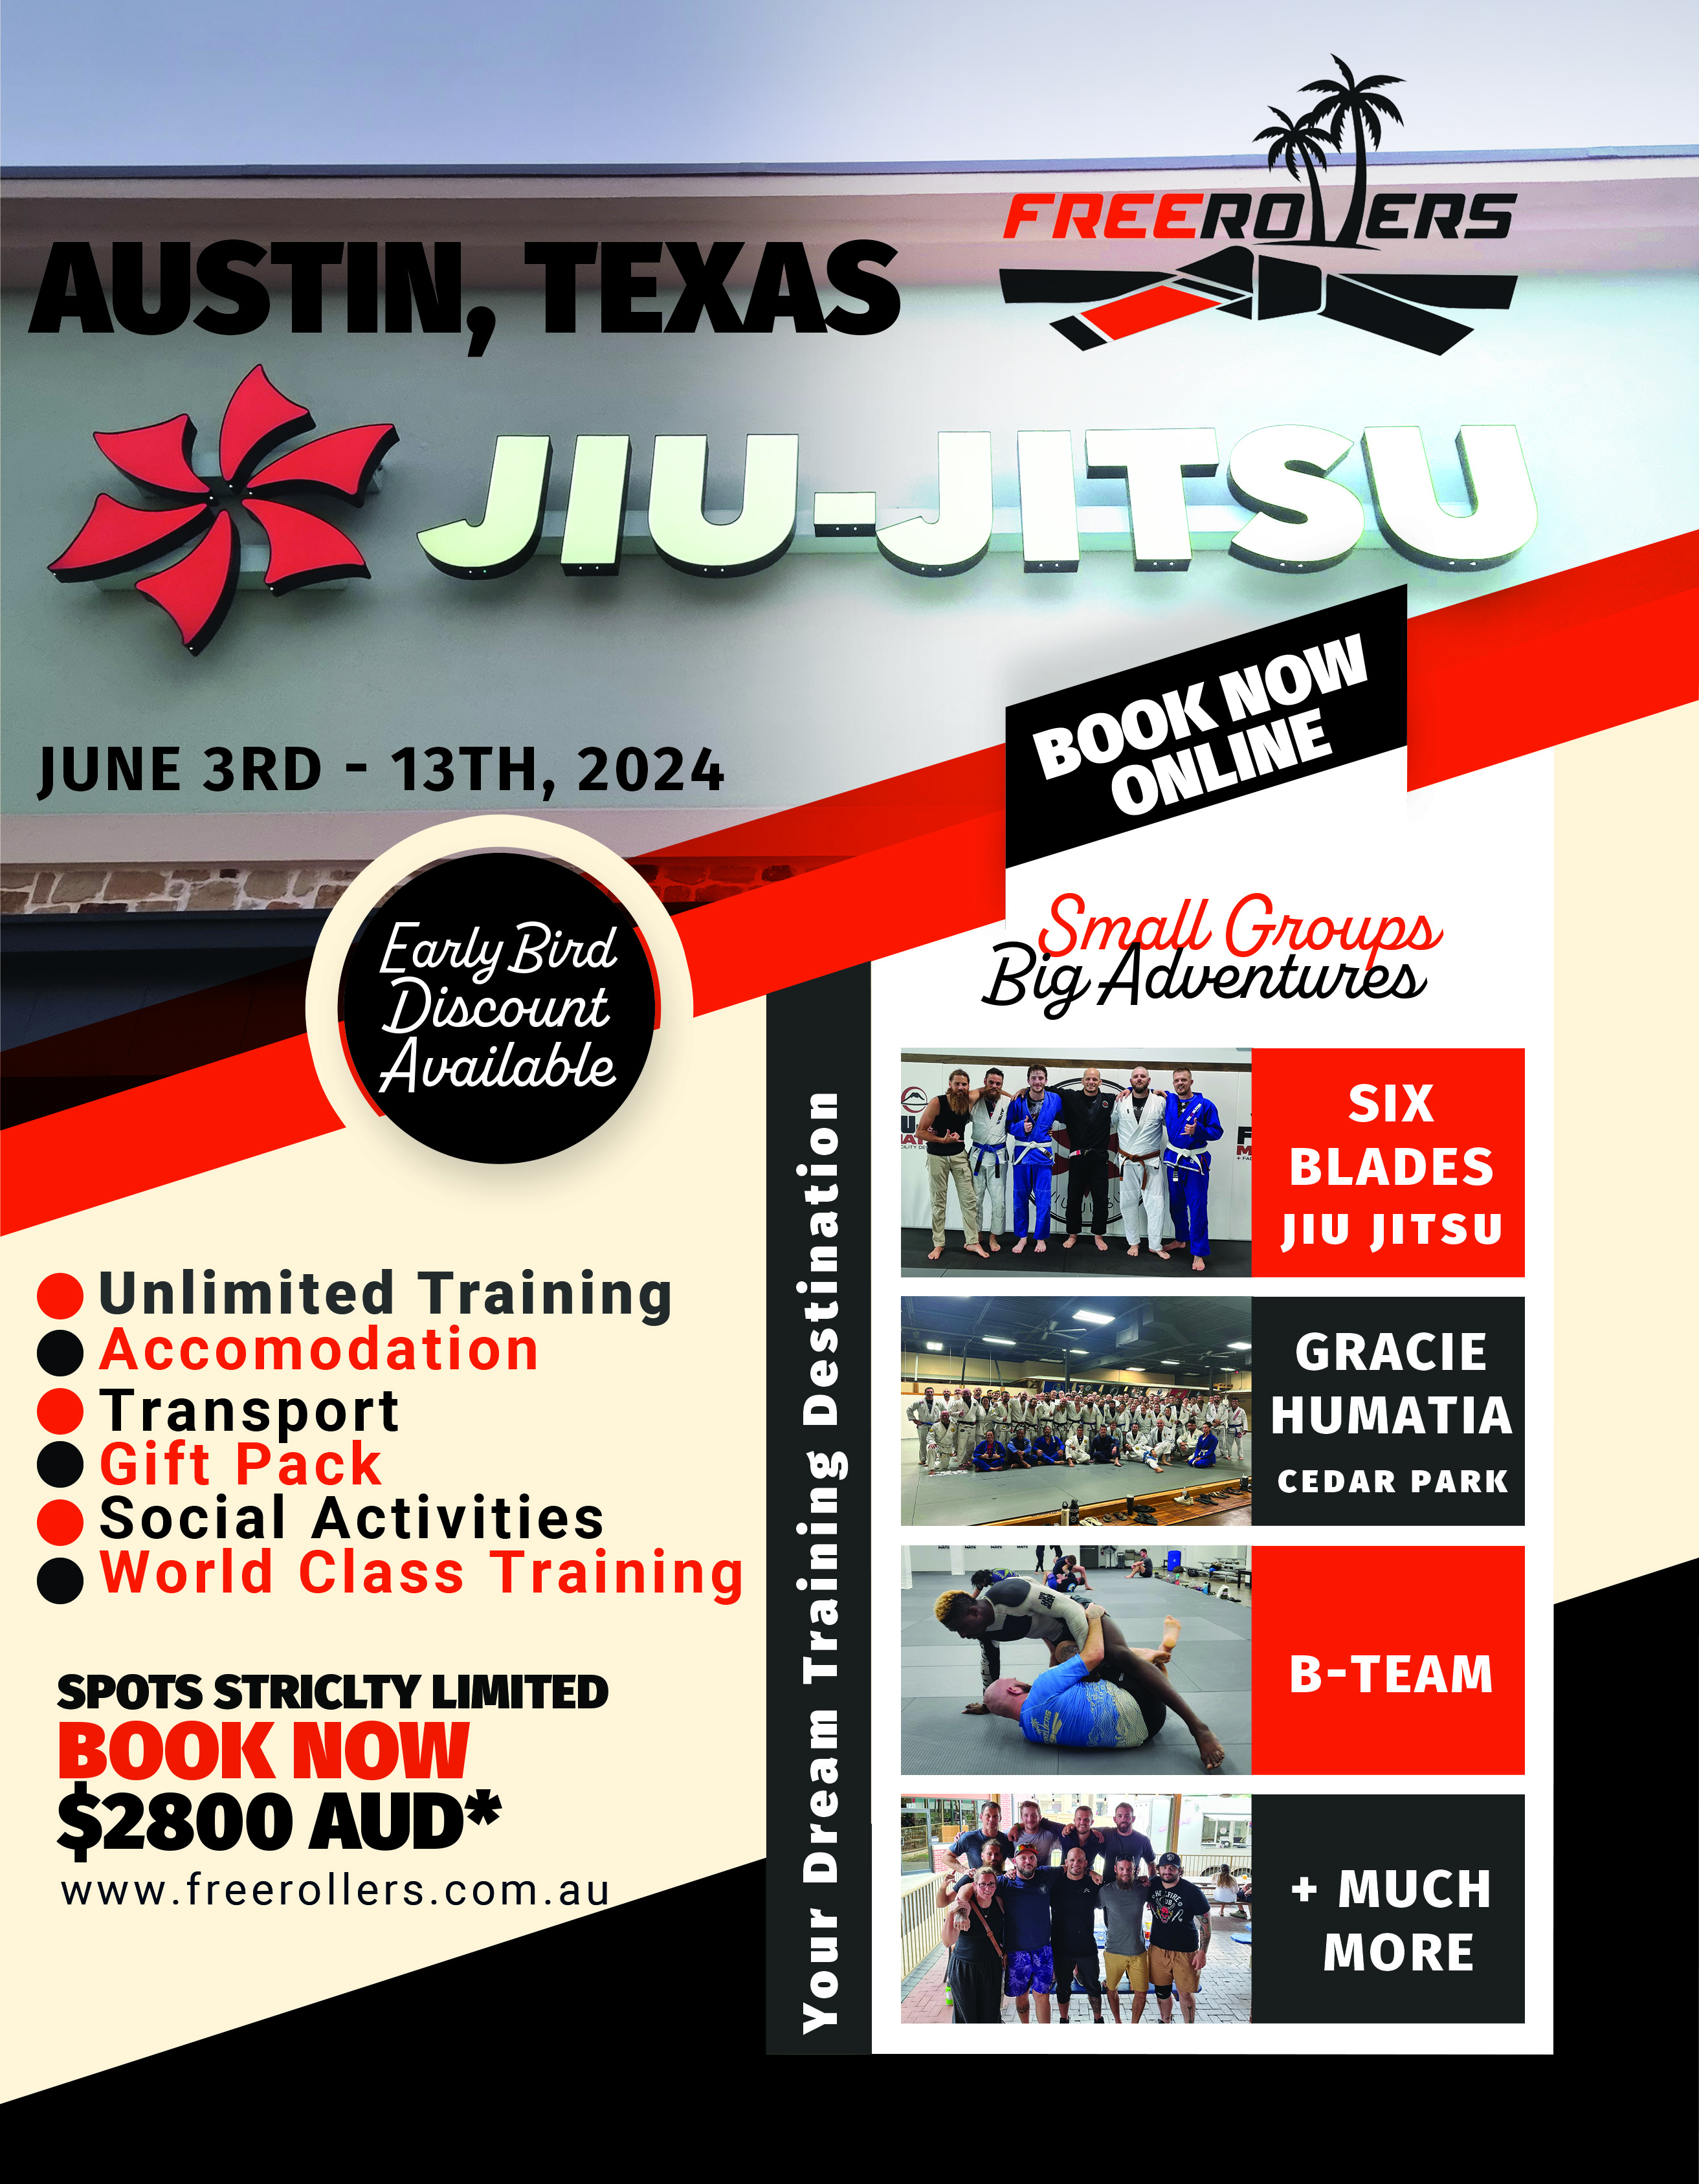 Free Rollers BJJ Getaways: Why Heading to Austin, Texas in June 2024 is a Brilliant Idea